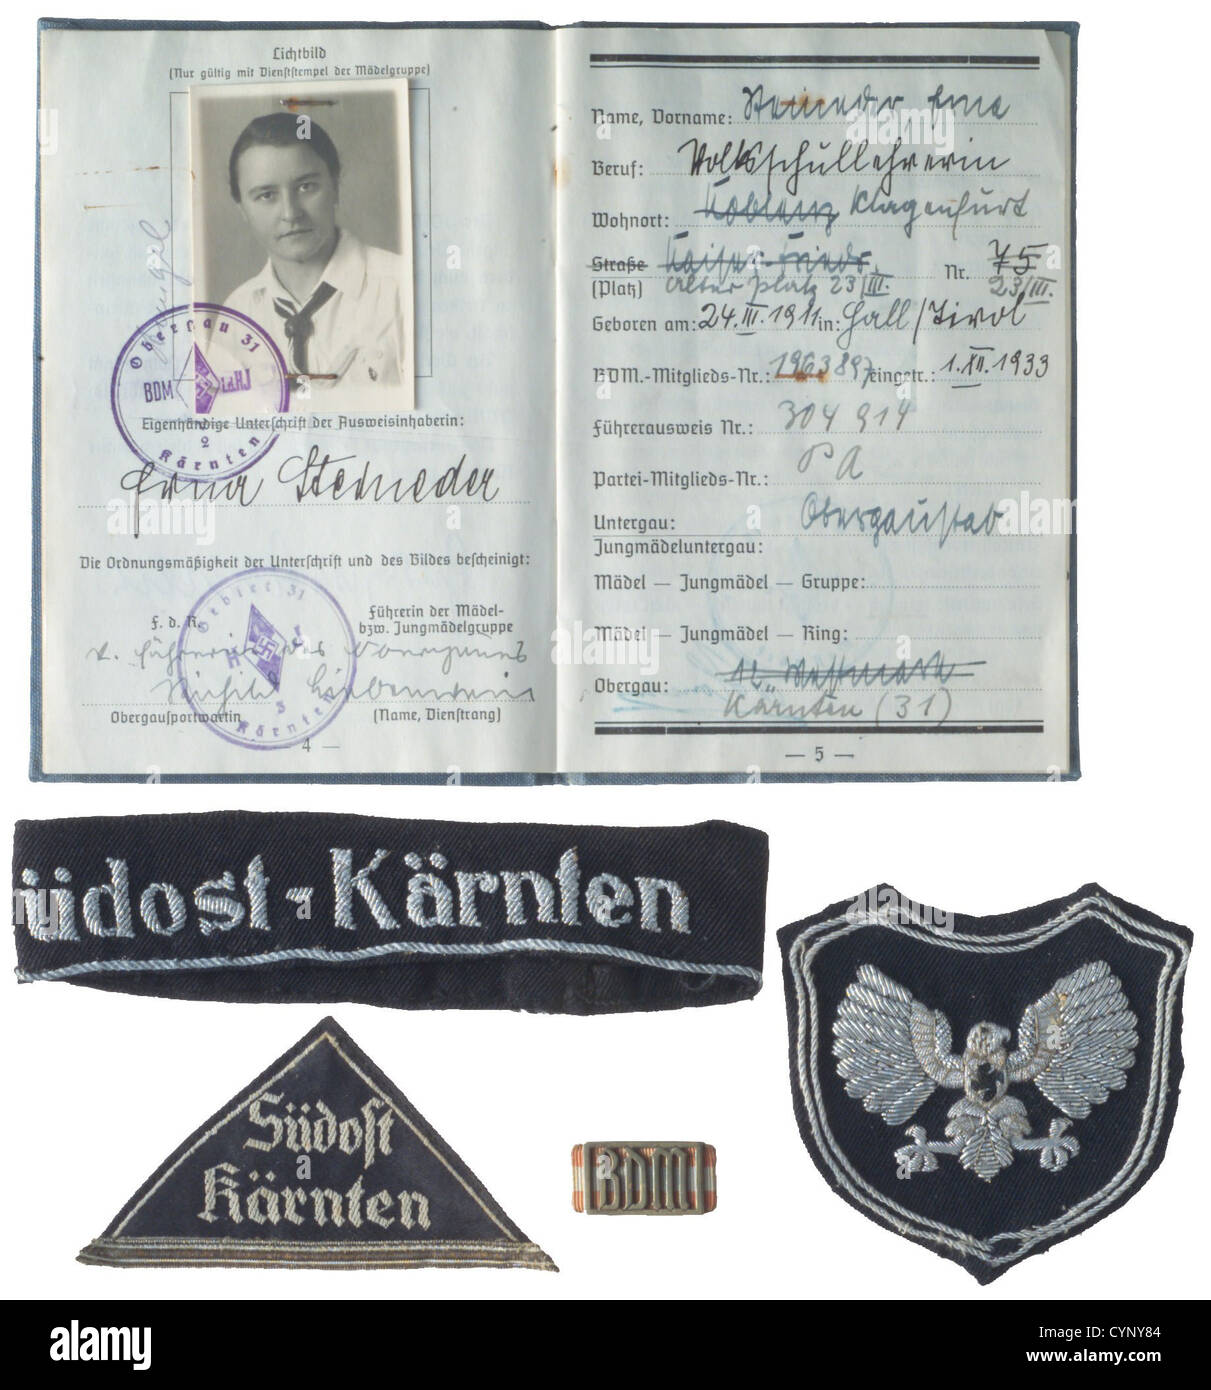 Hitler Youth / League of German Girls,German history,National Socialism,Nazism,historic,historical,League of German Girls service book,bagde,cuff title,eagle emblem for blouse,'Südost Kärnten'(Southeast Carinthia),historic,historical,1930s,1930s,20th century,League of German Girls,Band of German Maidens,youth organization,youth organizations,NS,National Socialism,Nazism,Third Reich,German Reich,Germany,National Socialist,Nazi,Nazi period,utensil,piece of equipment,utensils,object,objects,stills,clipping,clippings,cut out,c,Additional-Rights-Clearences-Not Available Stock Photo